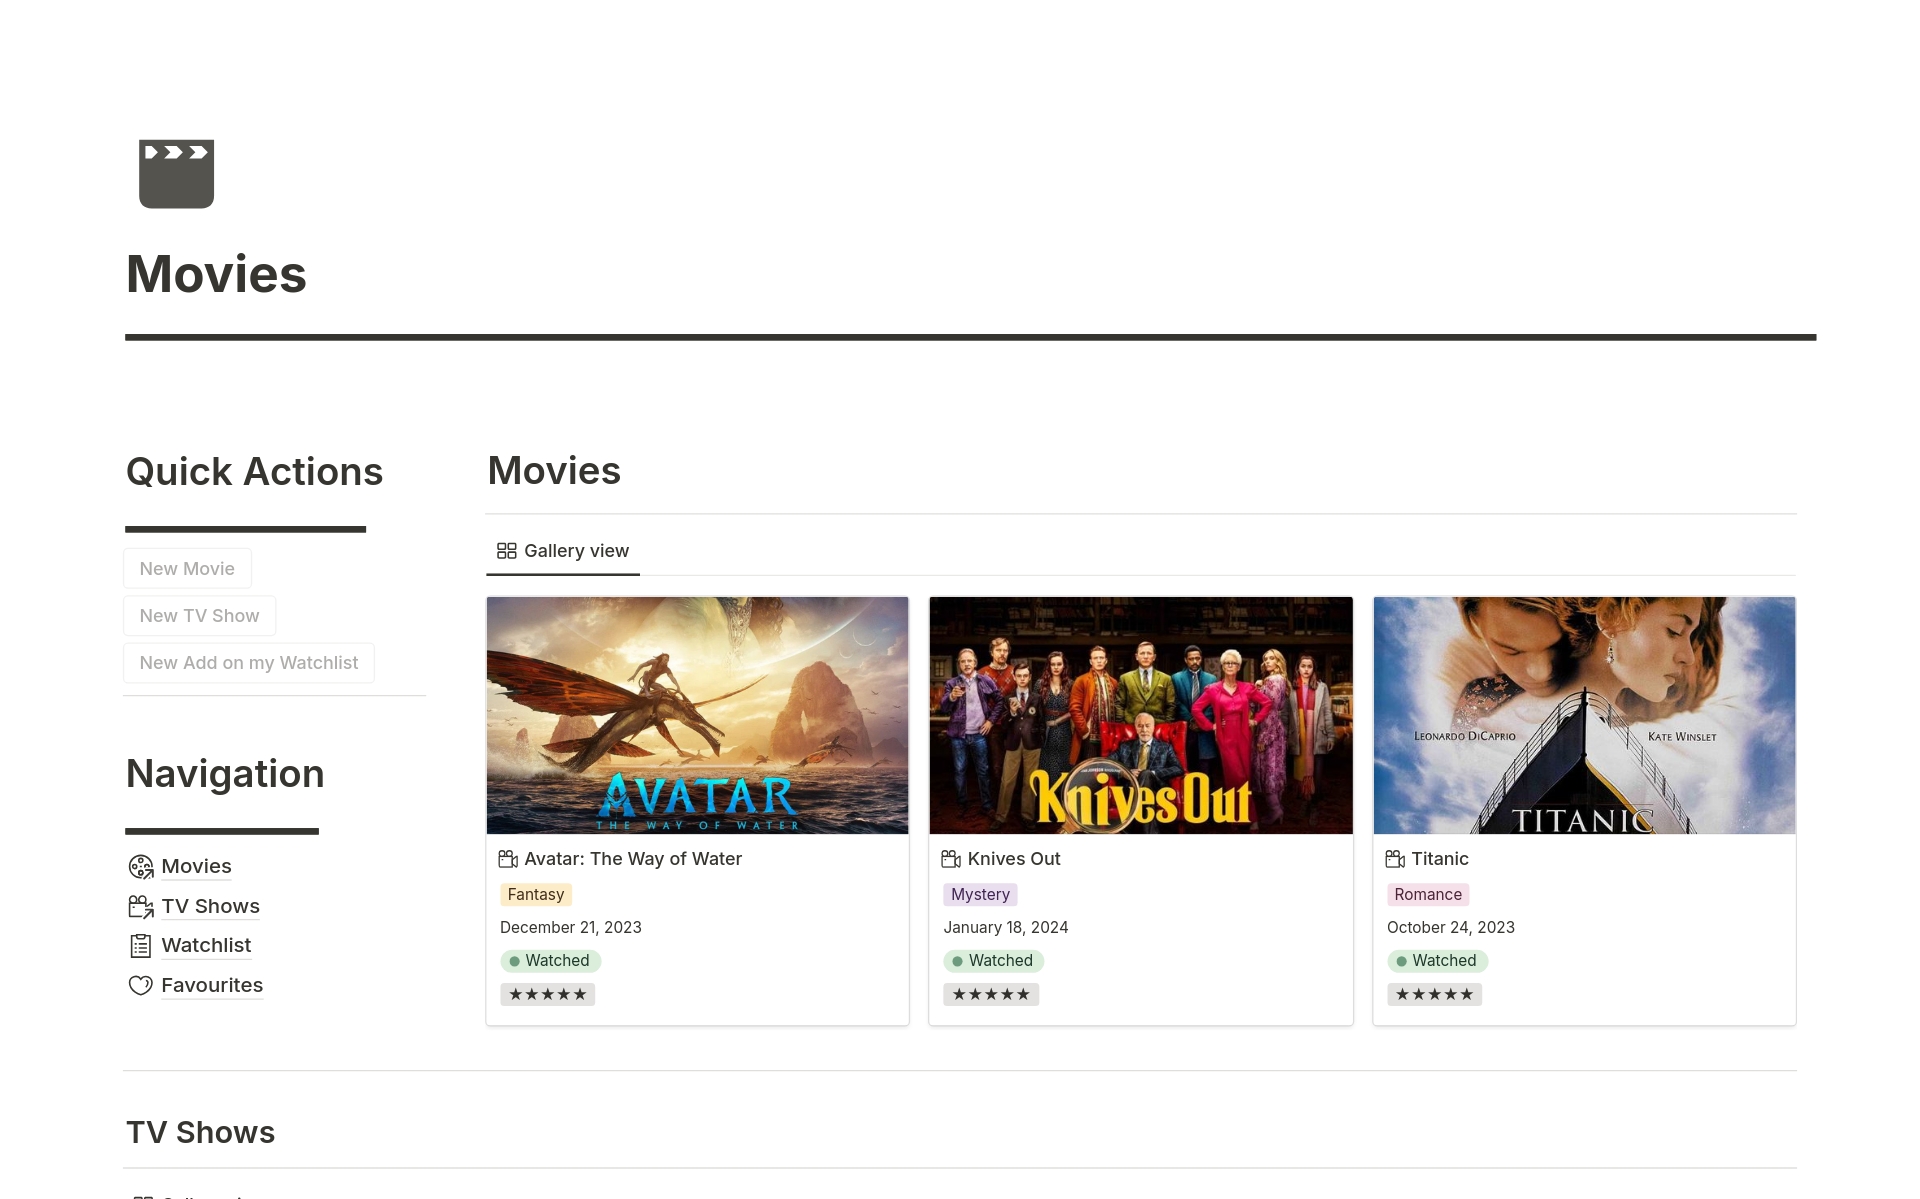 This template will help you track the Movies and TV Shows you have watched! 